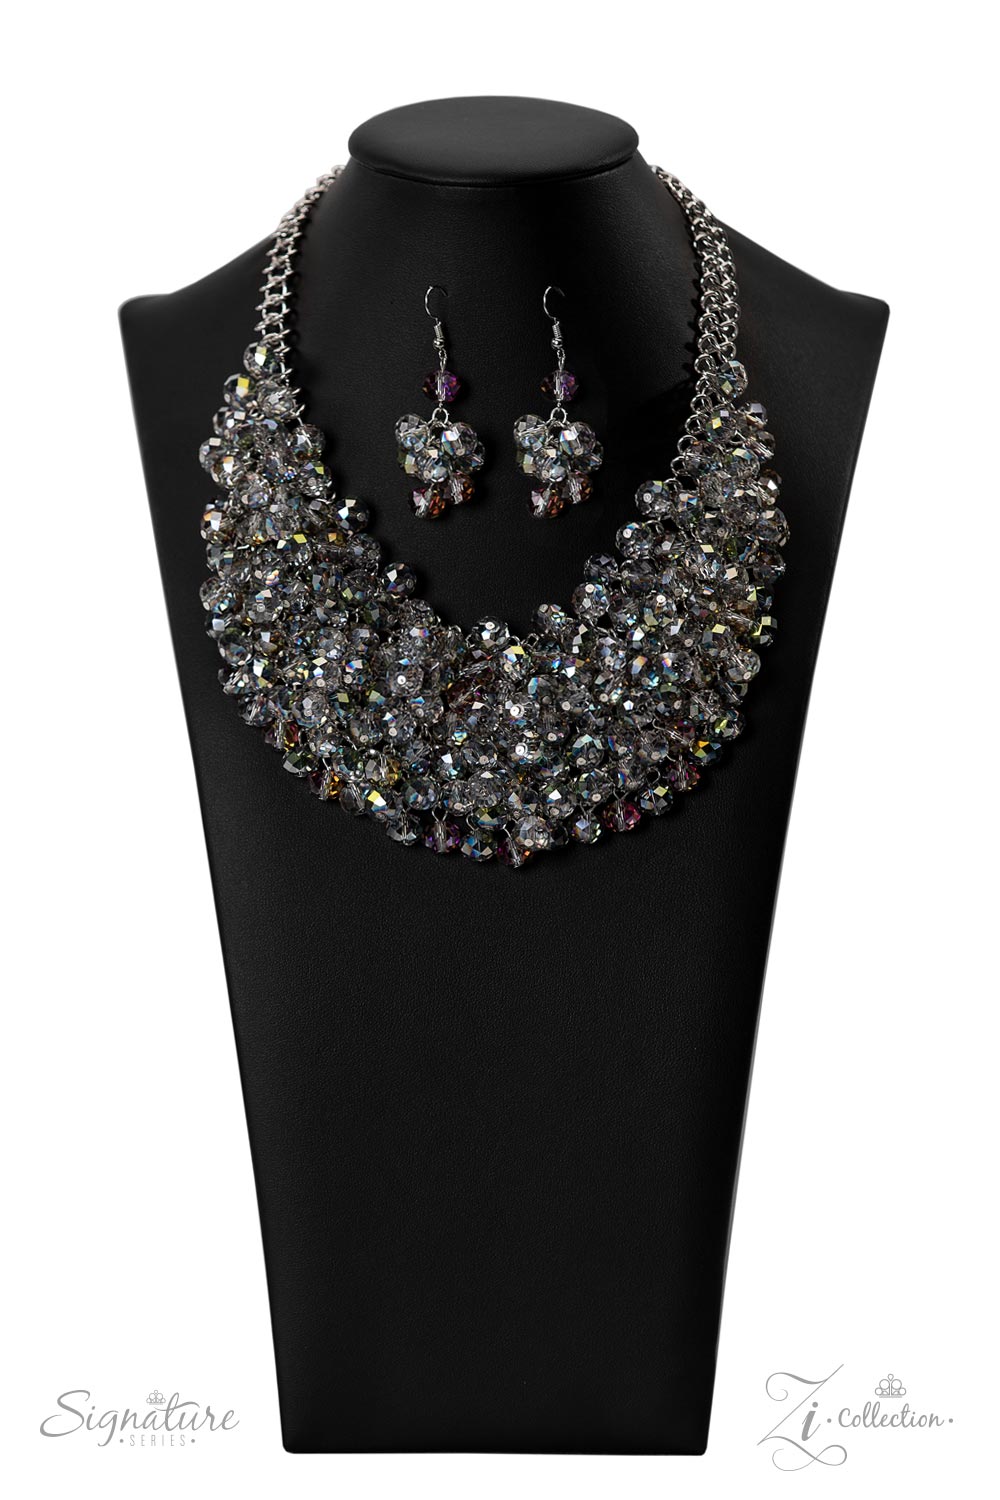 The Tanger - Zi Collection Necklace